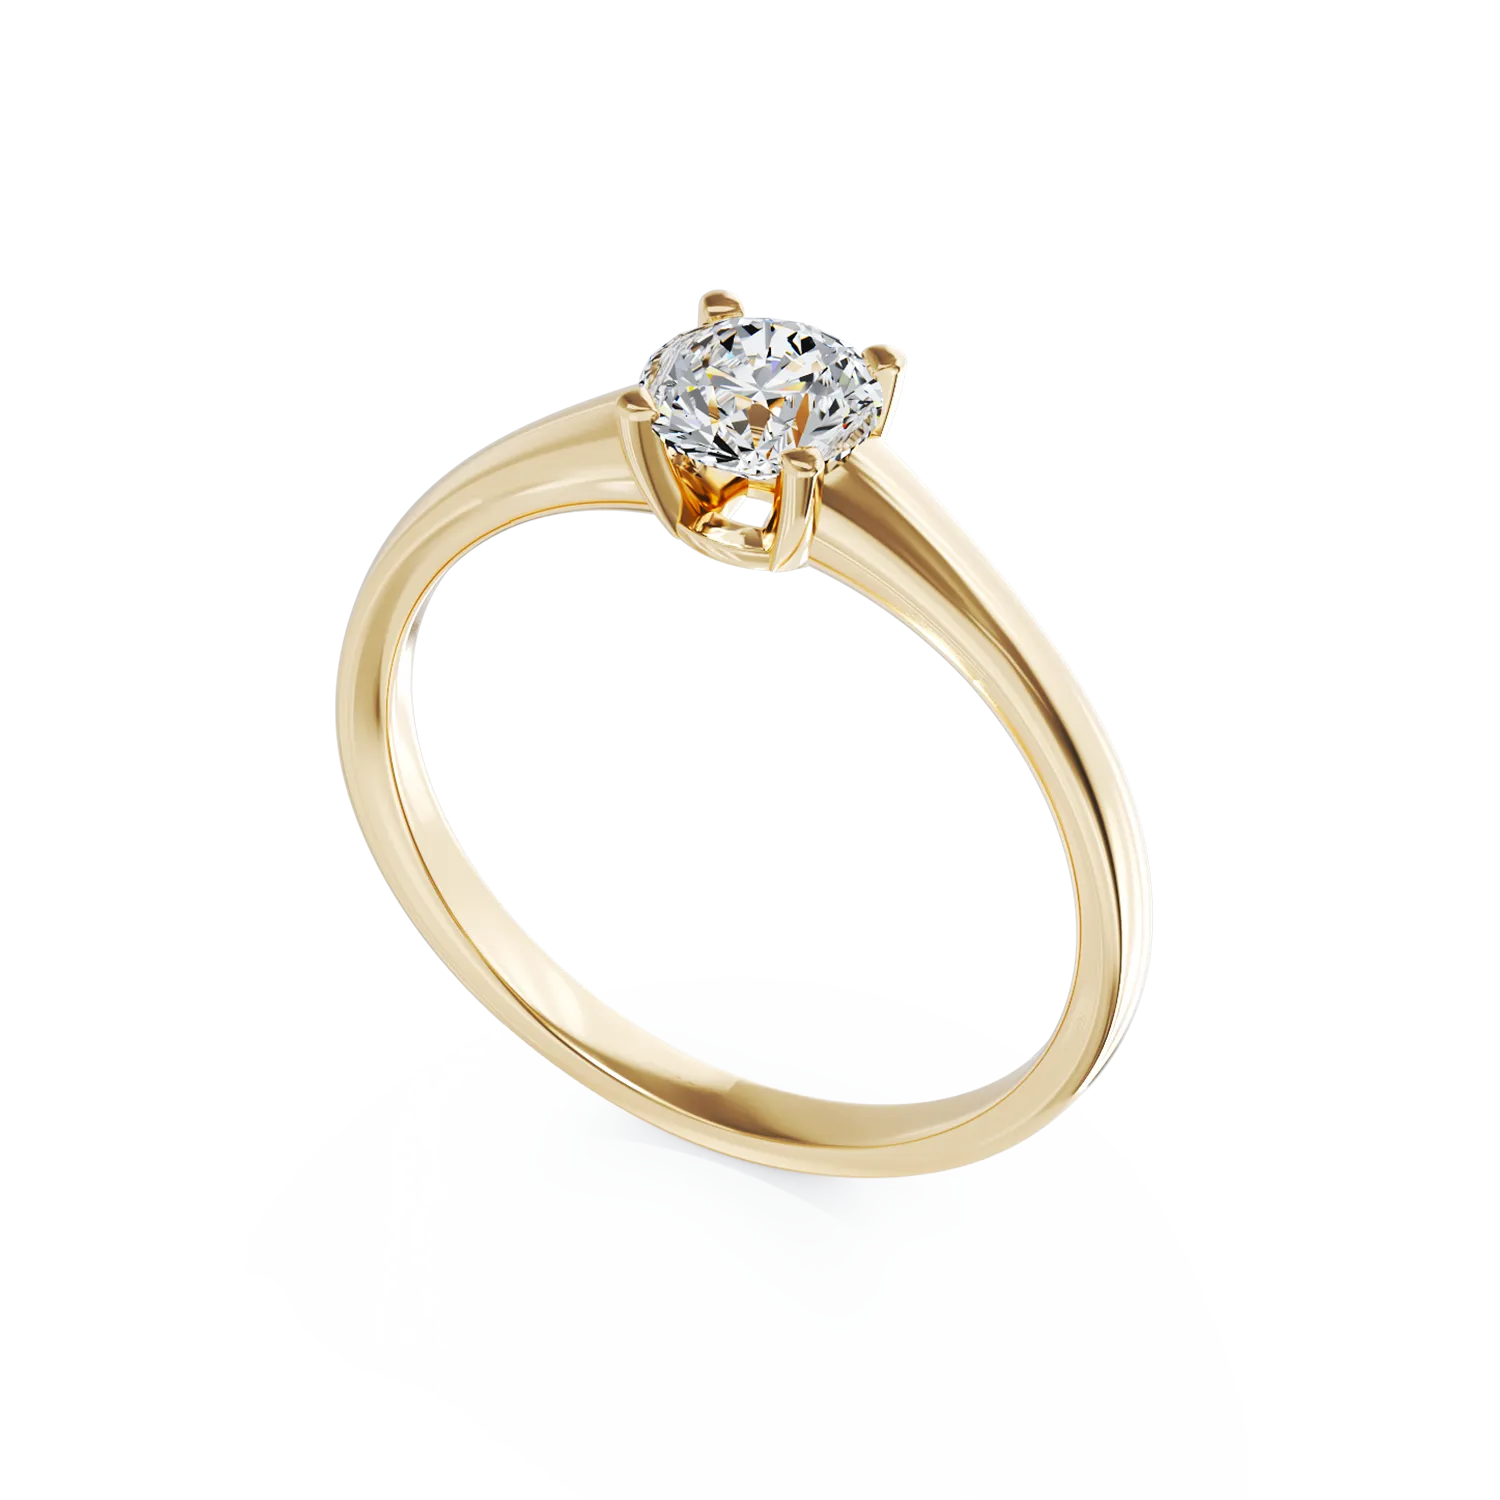 18K yellow gold engagement ring with a 0.5ct solitaire diamond